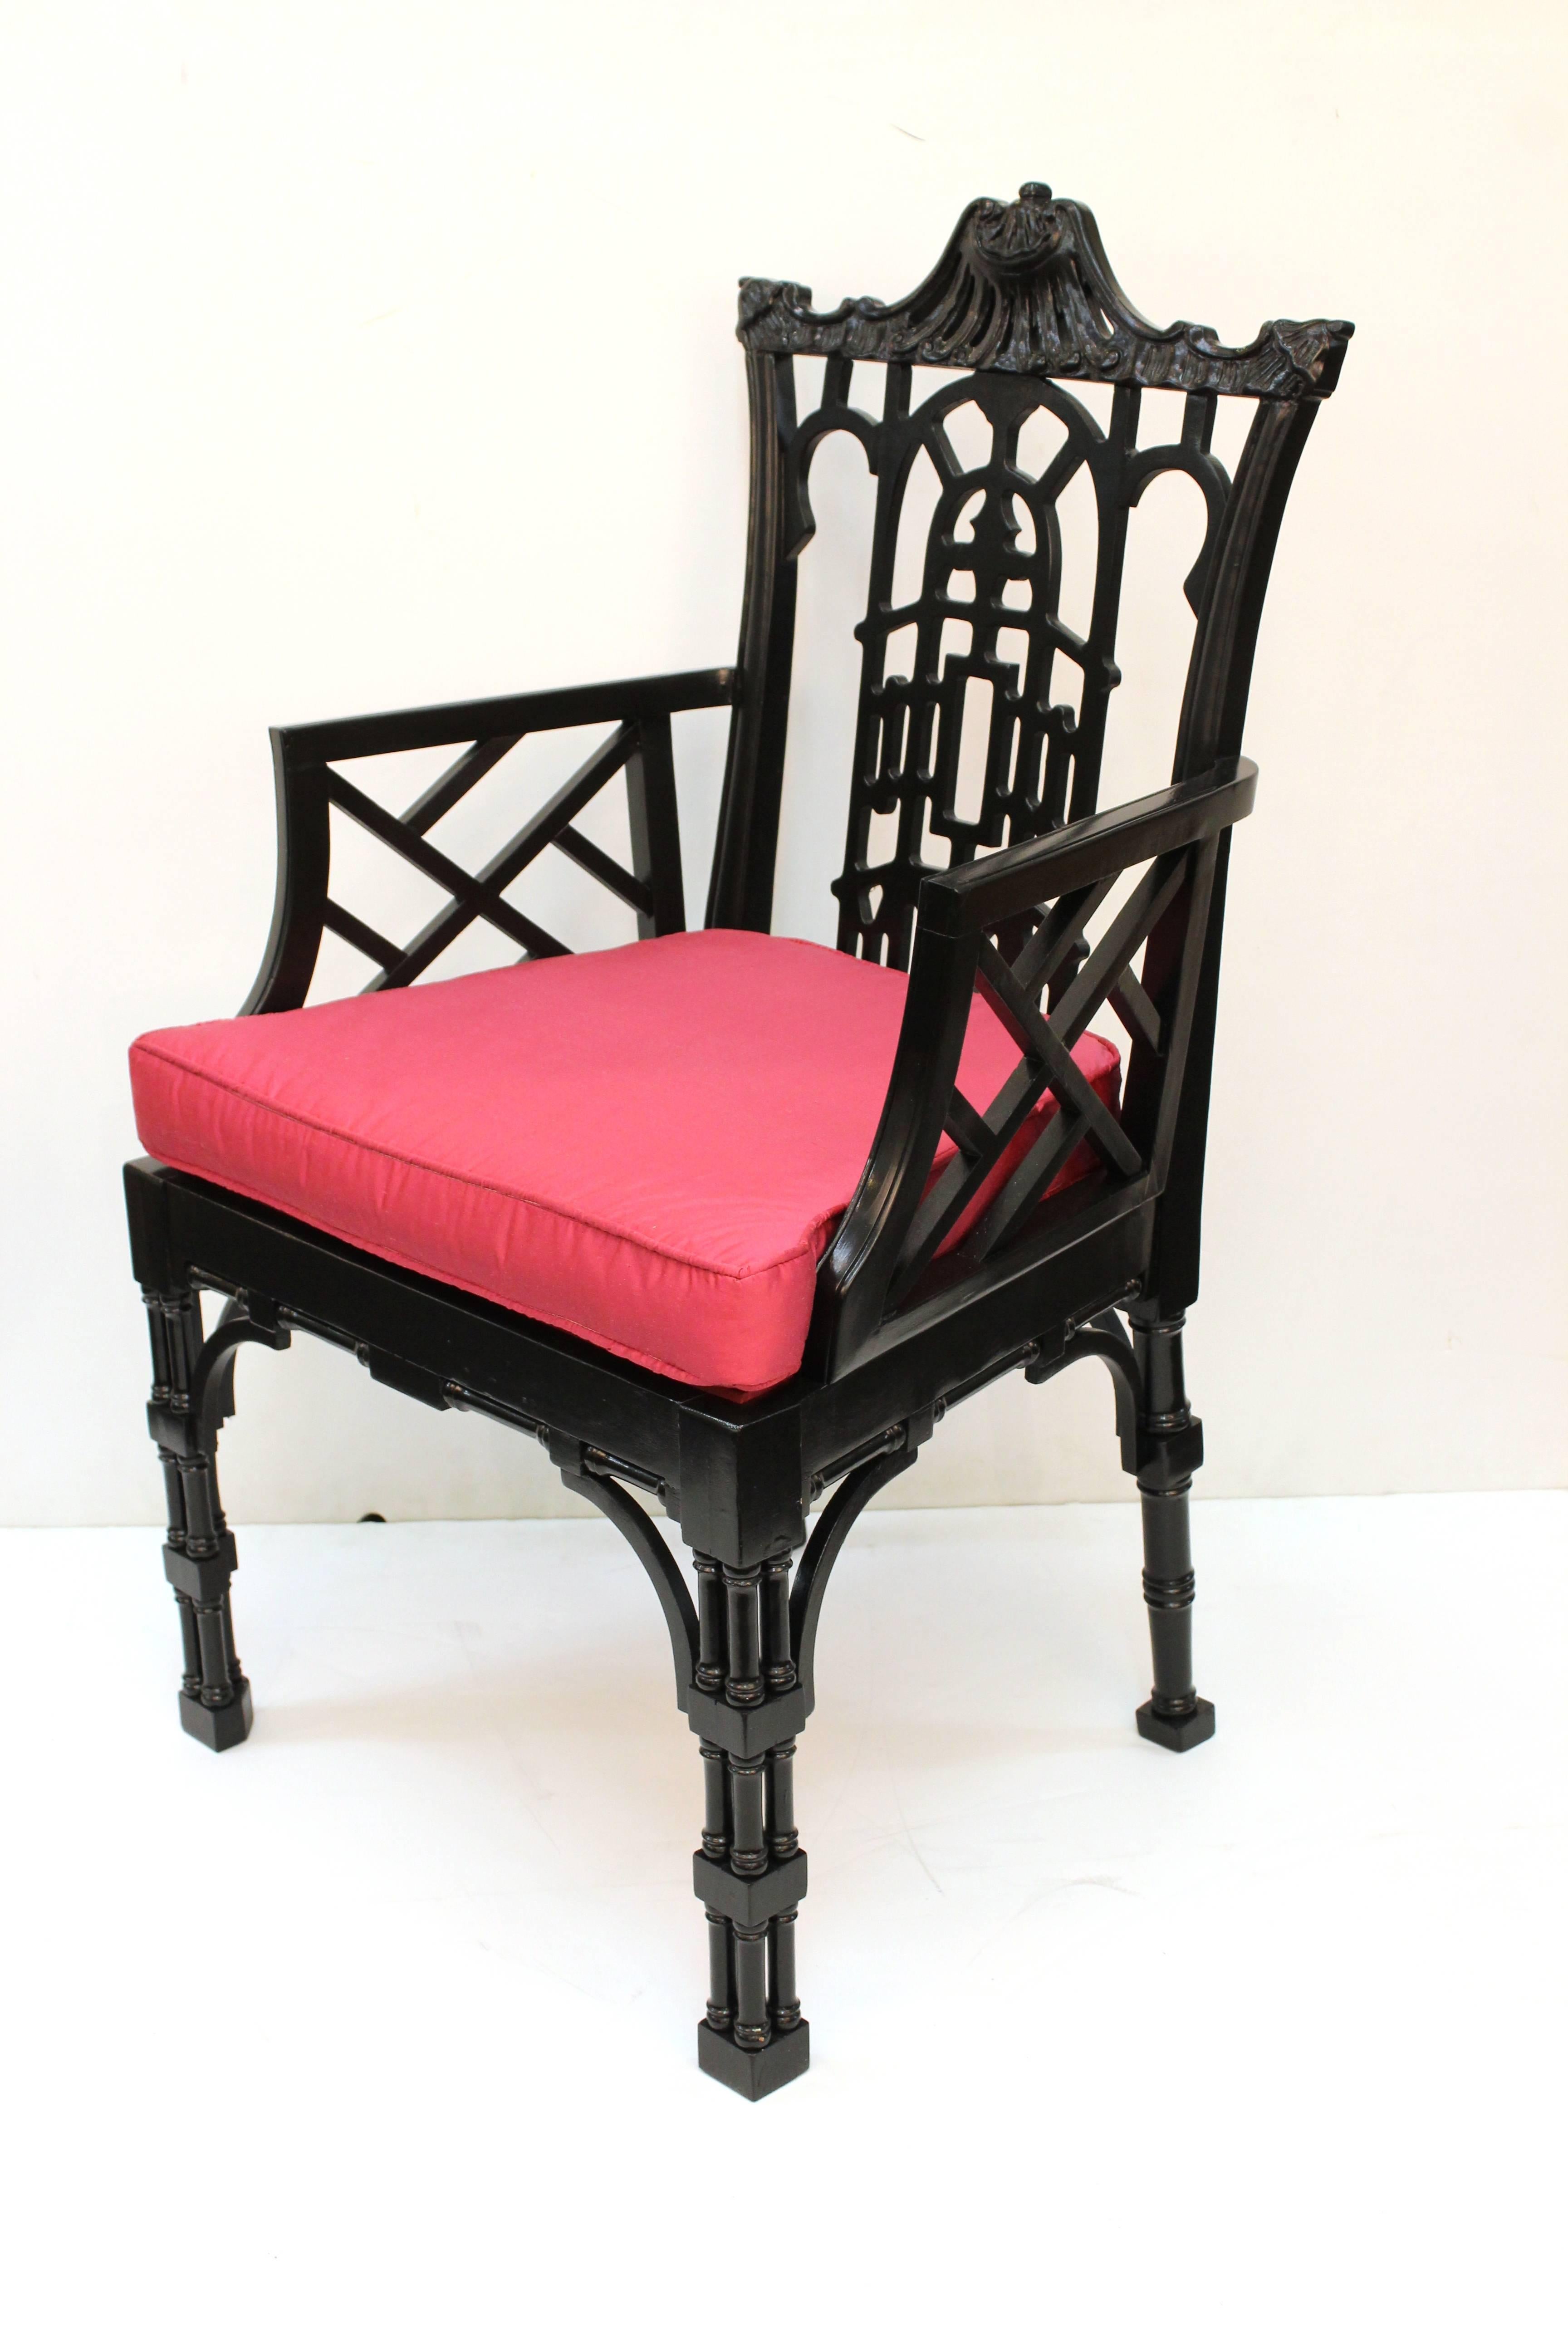 Pair of Hollywood Regency Chinese style Chippendale armchairs. Crafted in wood and finished with glossy black lacquer. Recently reupholstered in pink silk. In excellent condition.